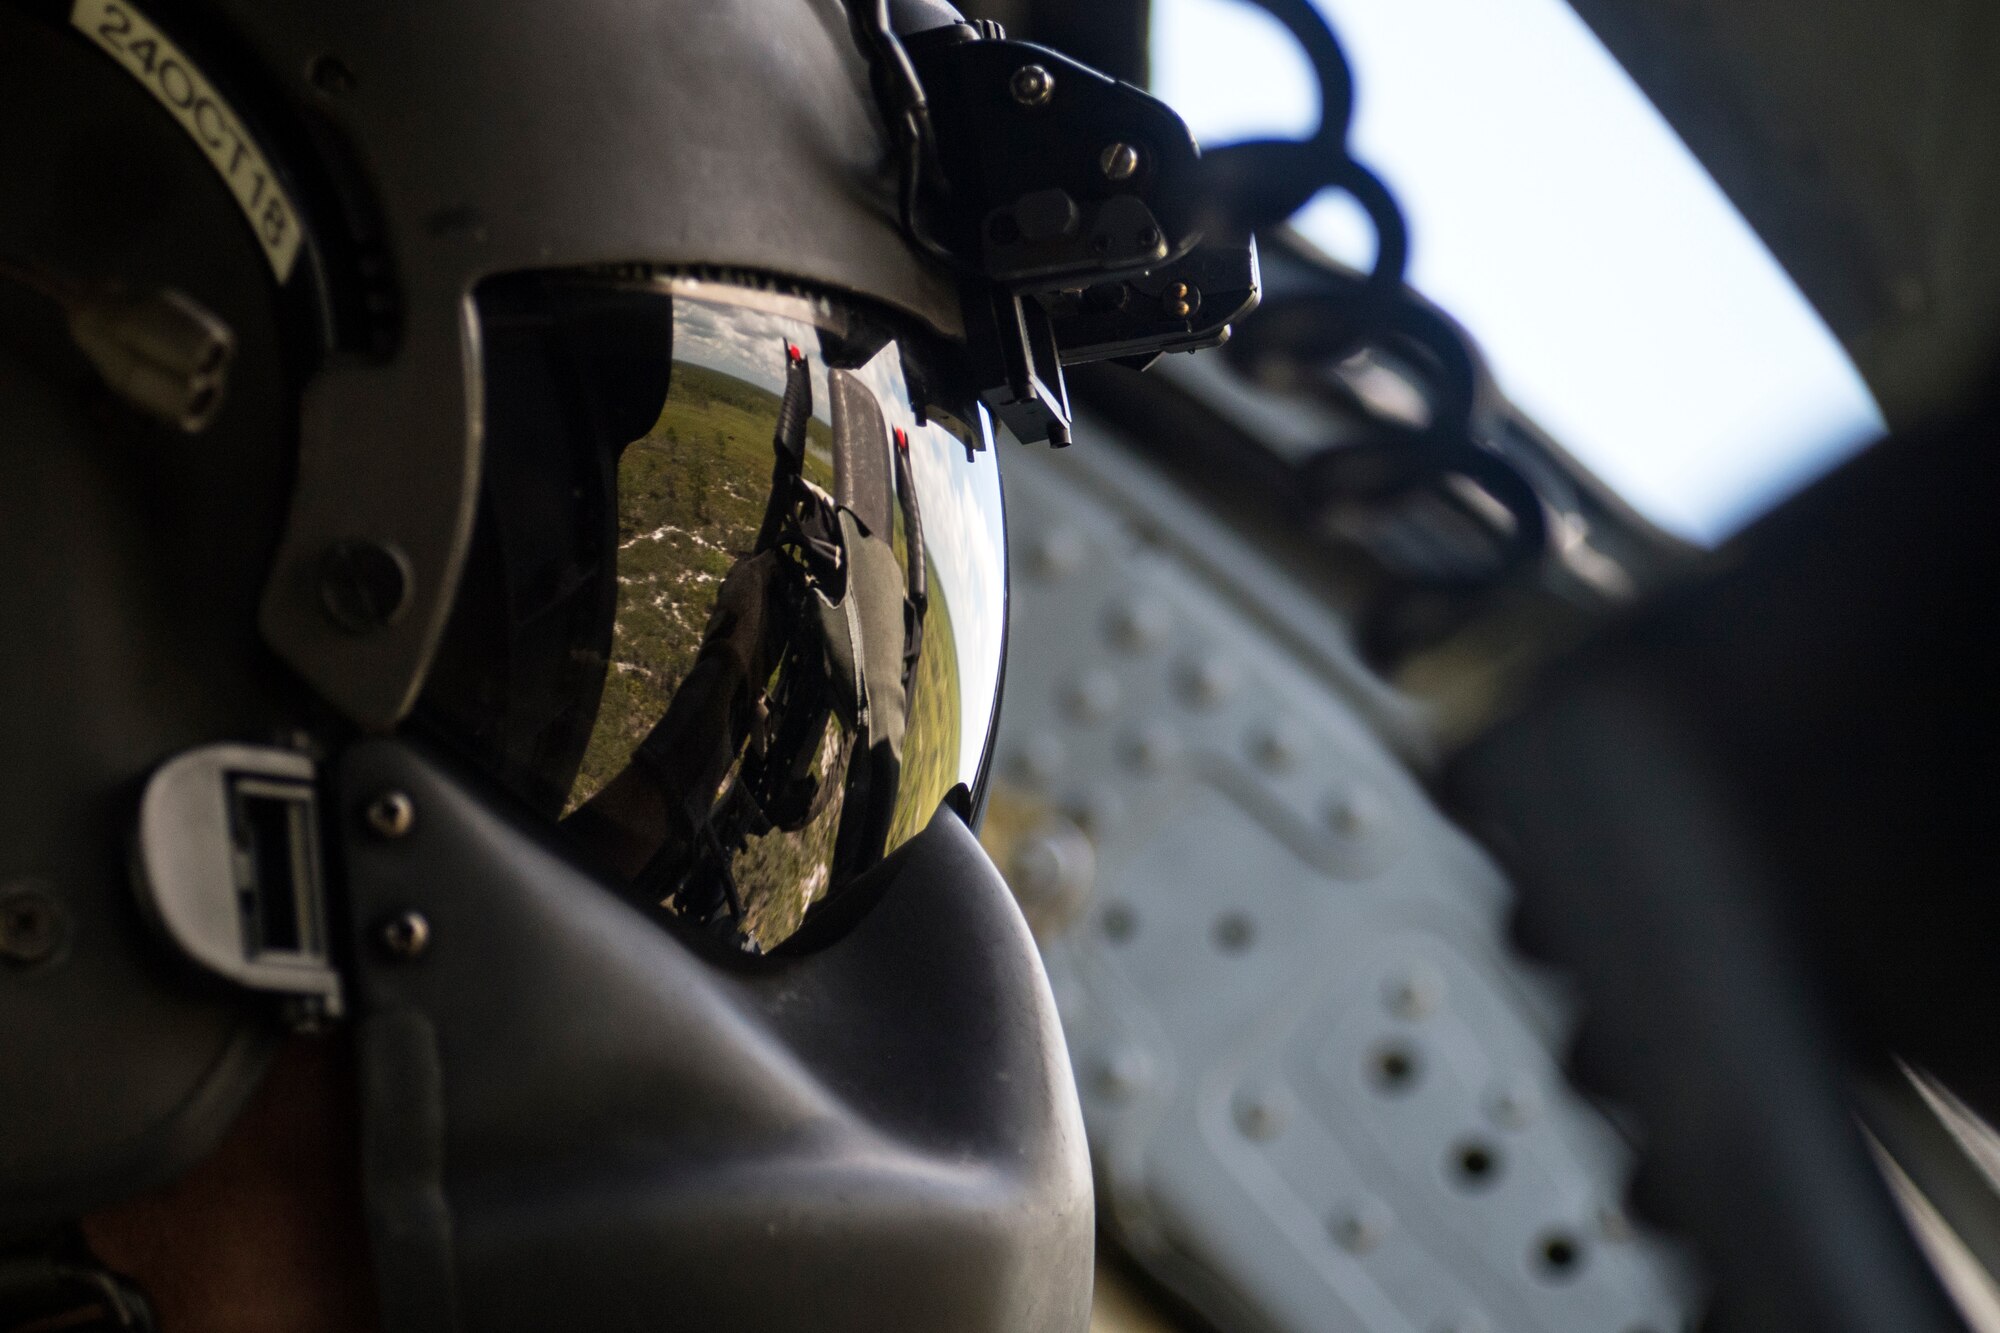 A special missions aviator from the 41st Rescue Squadron (RQS) aims the .50 caliber machine gun mounted to an HH-60G Pave Hawk, Aug. 17, 2018, at Patrick Air Force Base, Fla. Airmen from the 41st RQS and 41st Helicopter Maintenance Unit traveled to Patrick AFB to participate in a spin-up exercise. During the exercise, Airmen faced scenarios and situations they may encounter downrange. (U.S. Air Force photo by Senior Airman Janiqua P. Robinson)